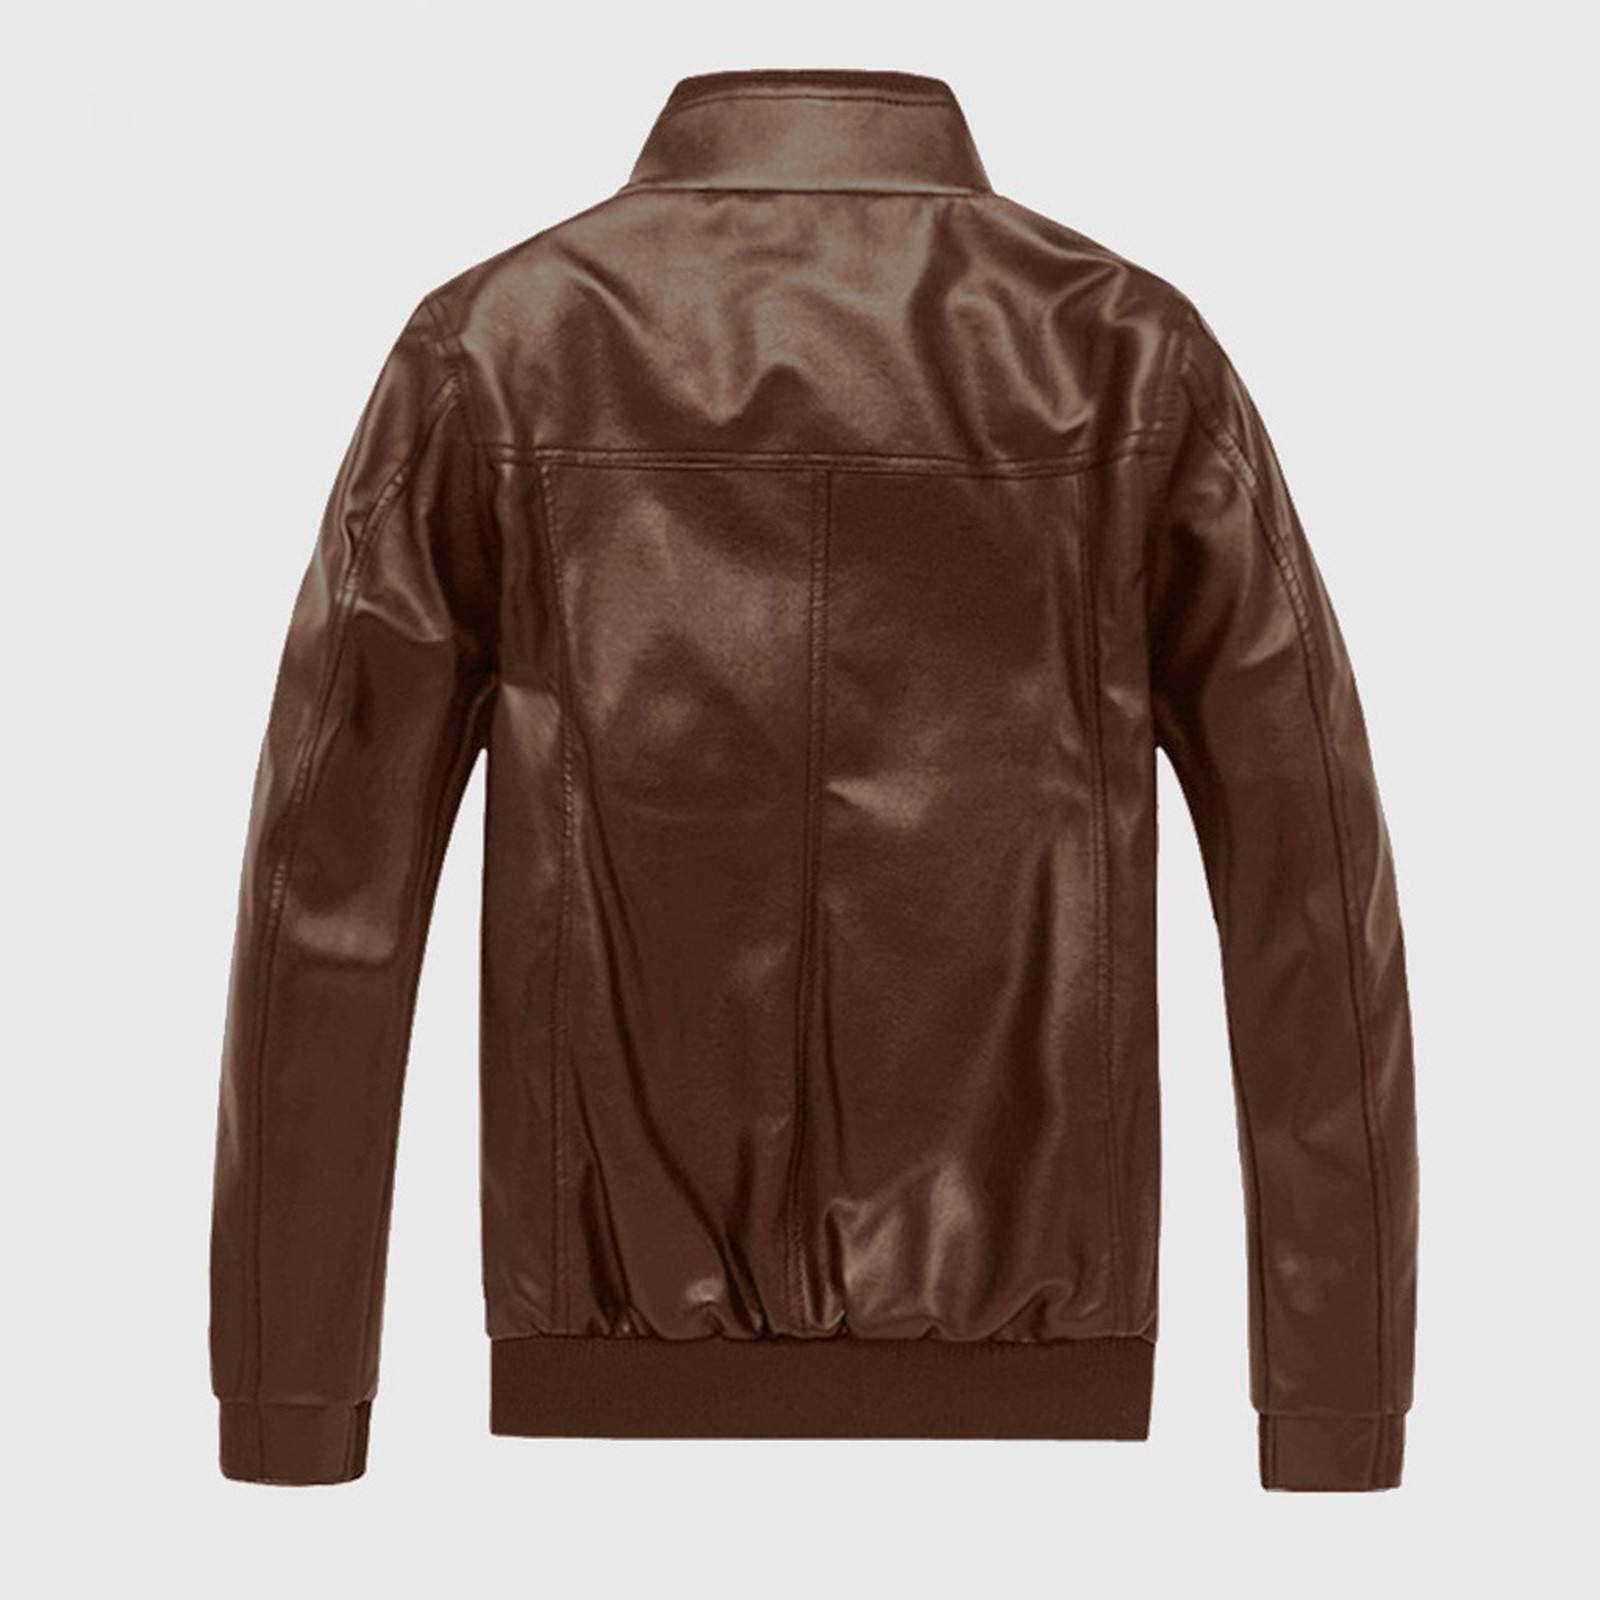 solacol Jackets for Men Mens Jackets Winter Mens Jacket Winter Mens Winter Leather Jacket Biker Motorcycle Zipper Long Sleeve Coat Top Blouses Mens Winter Coats Leather Jacket Men Motorcycle - image 1 of 5